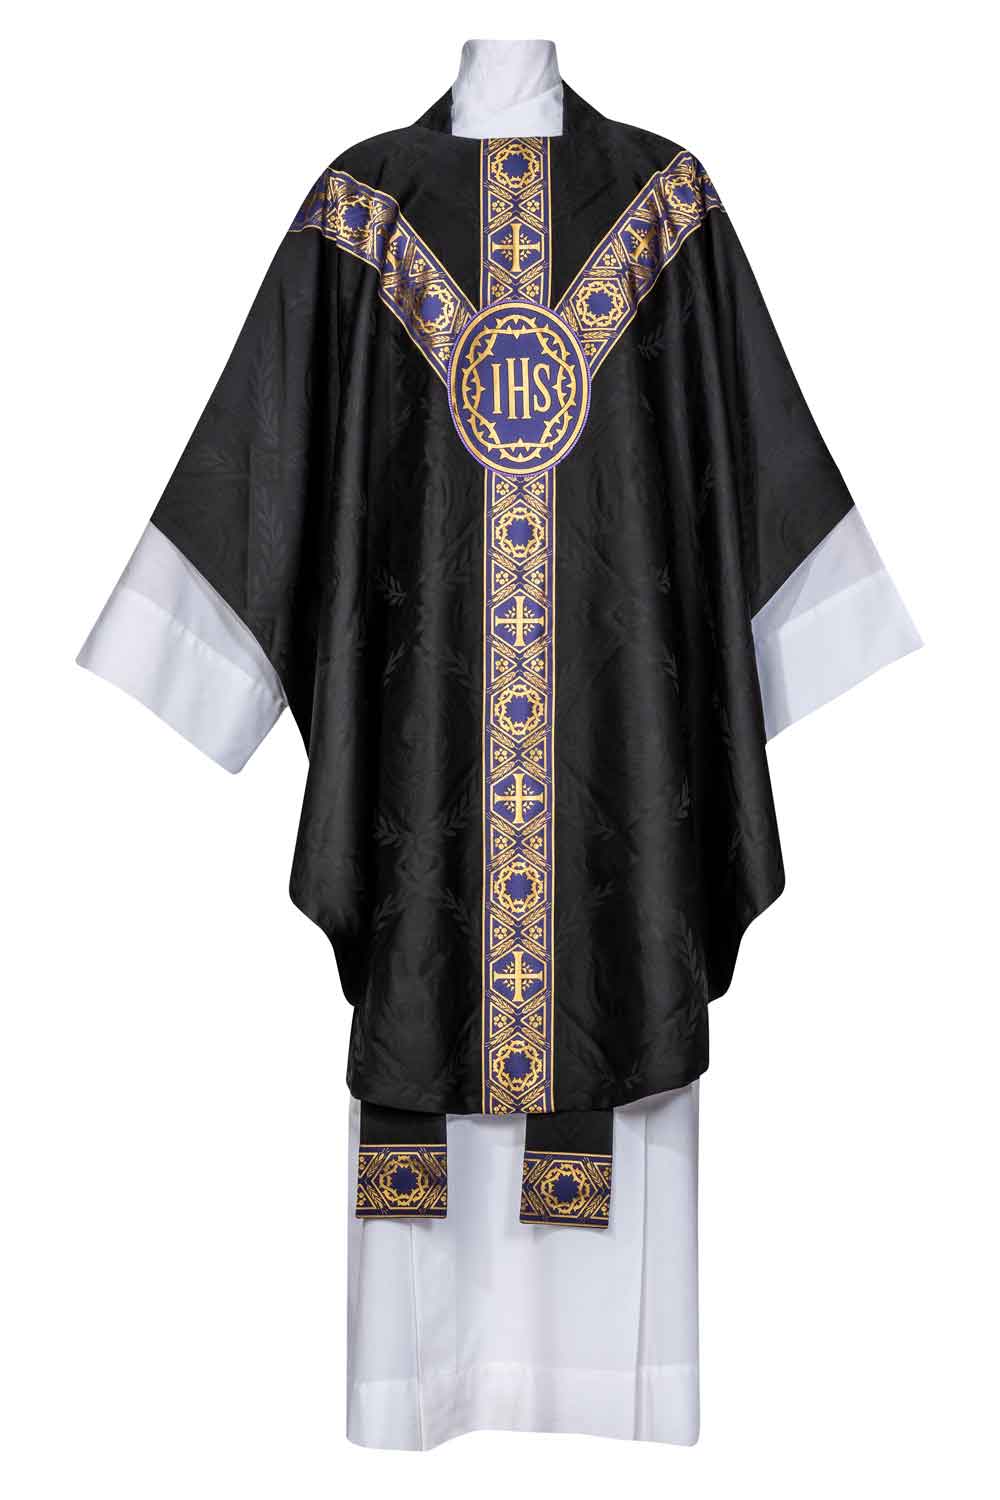 Crown of Thorns Chasuble